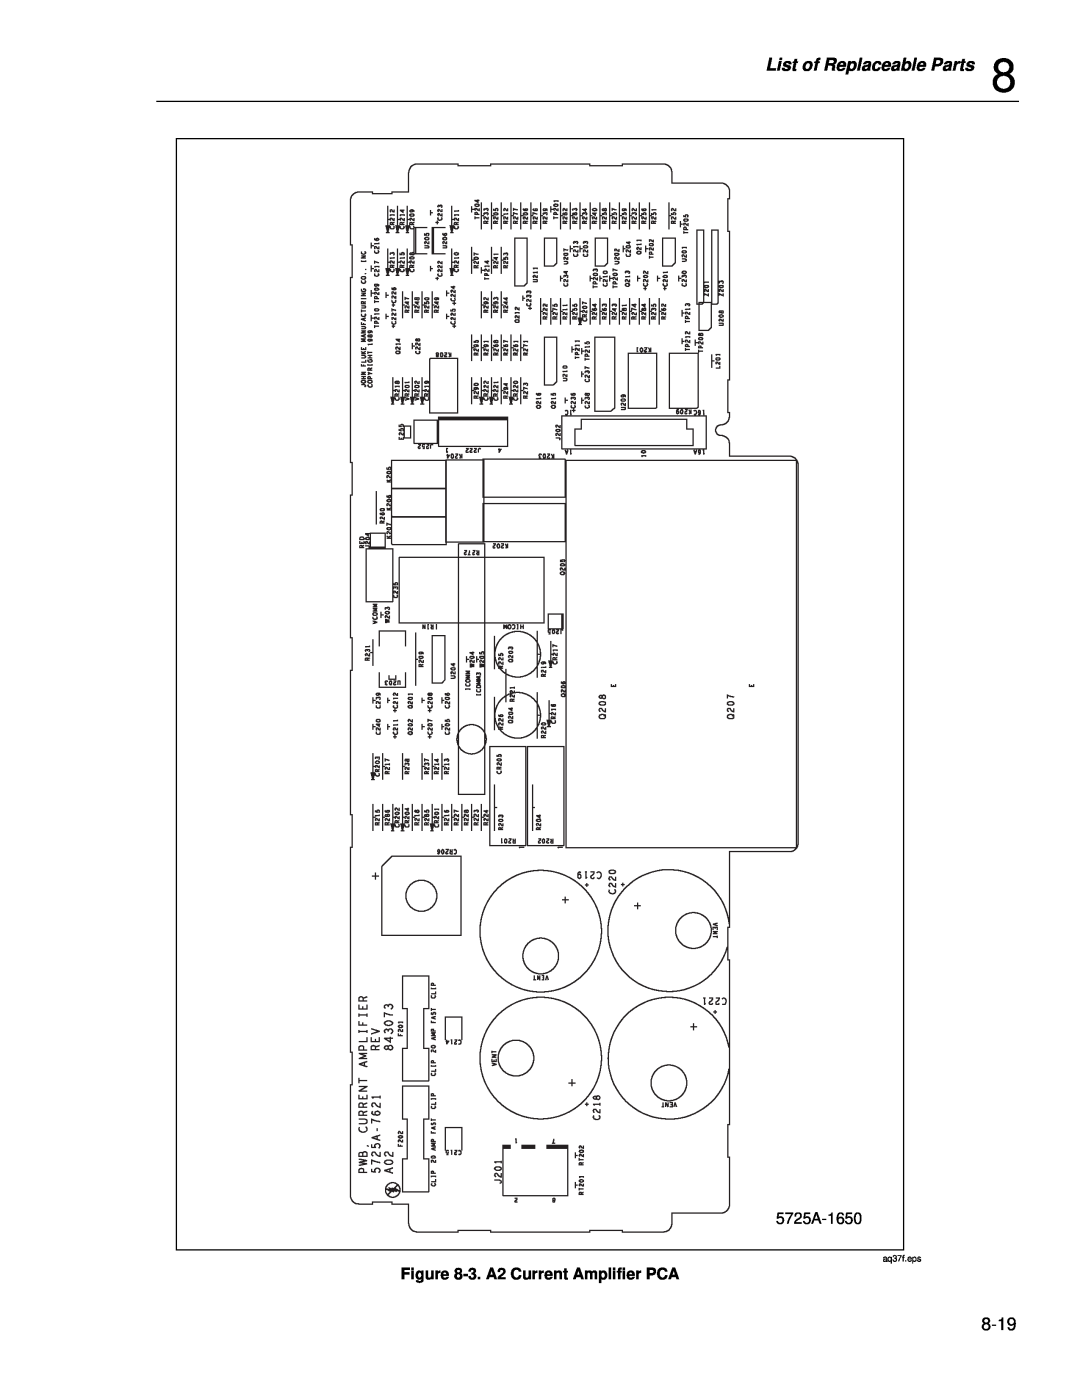 Fluke instruction manual List of Replaceable Parts, 5725A-1650, 3.A2 Current Amplifier PCA, aq37f.eps 